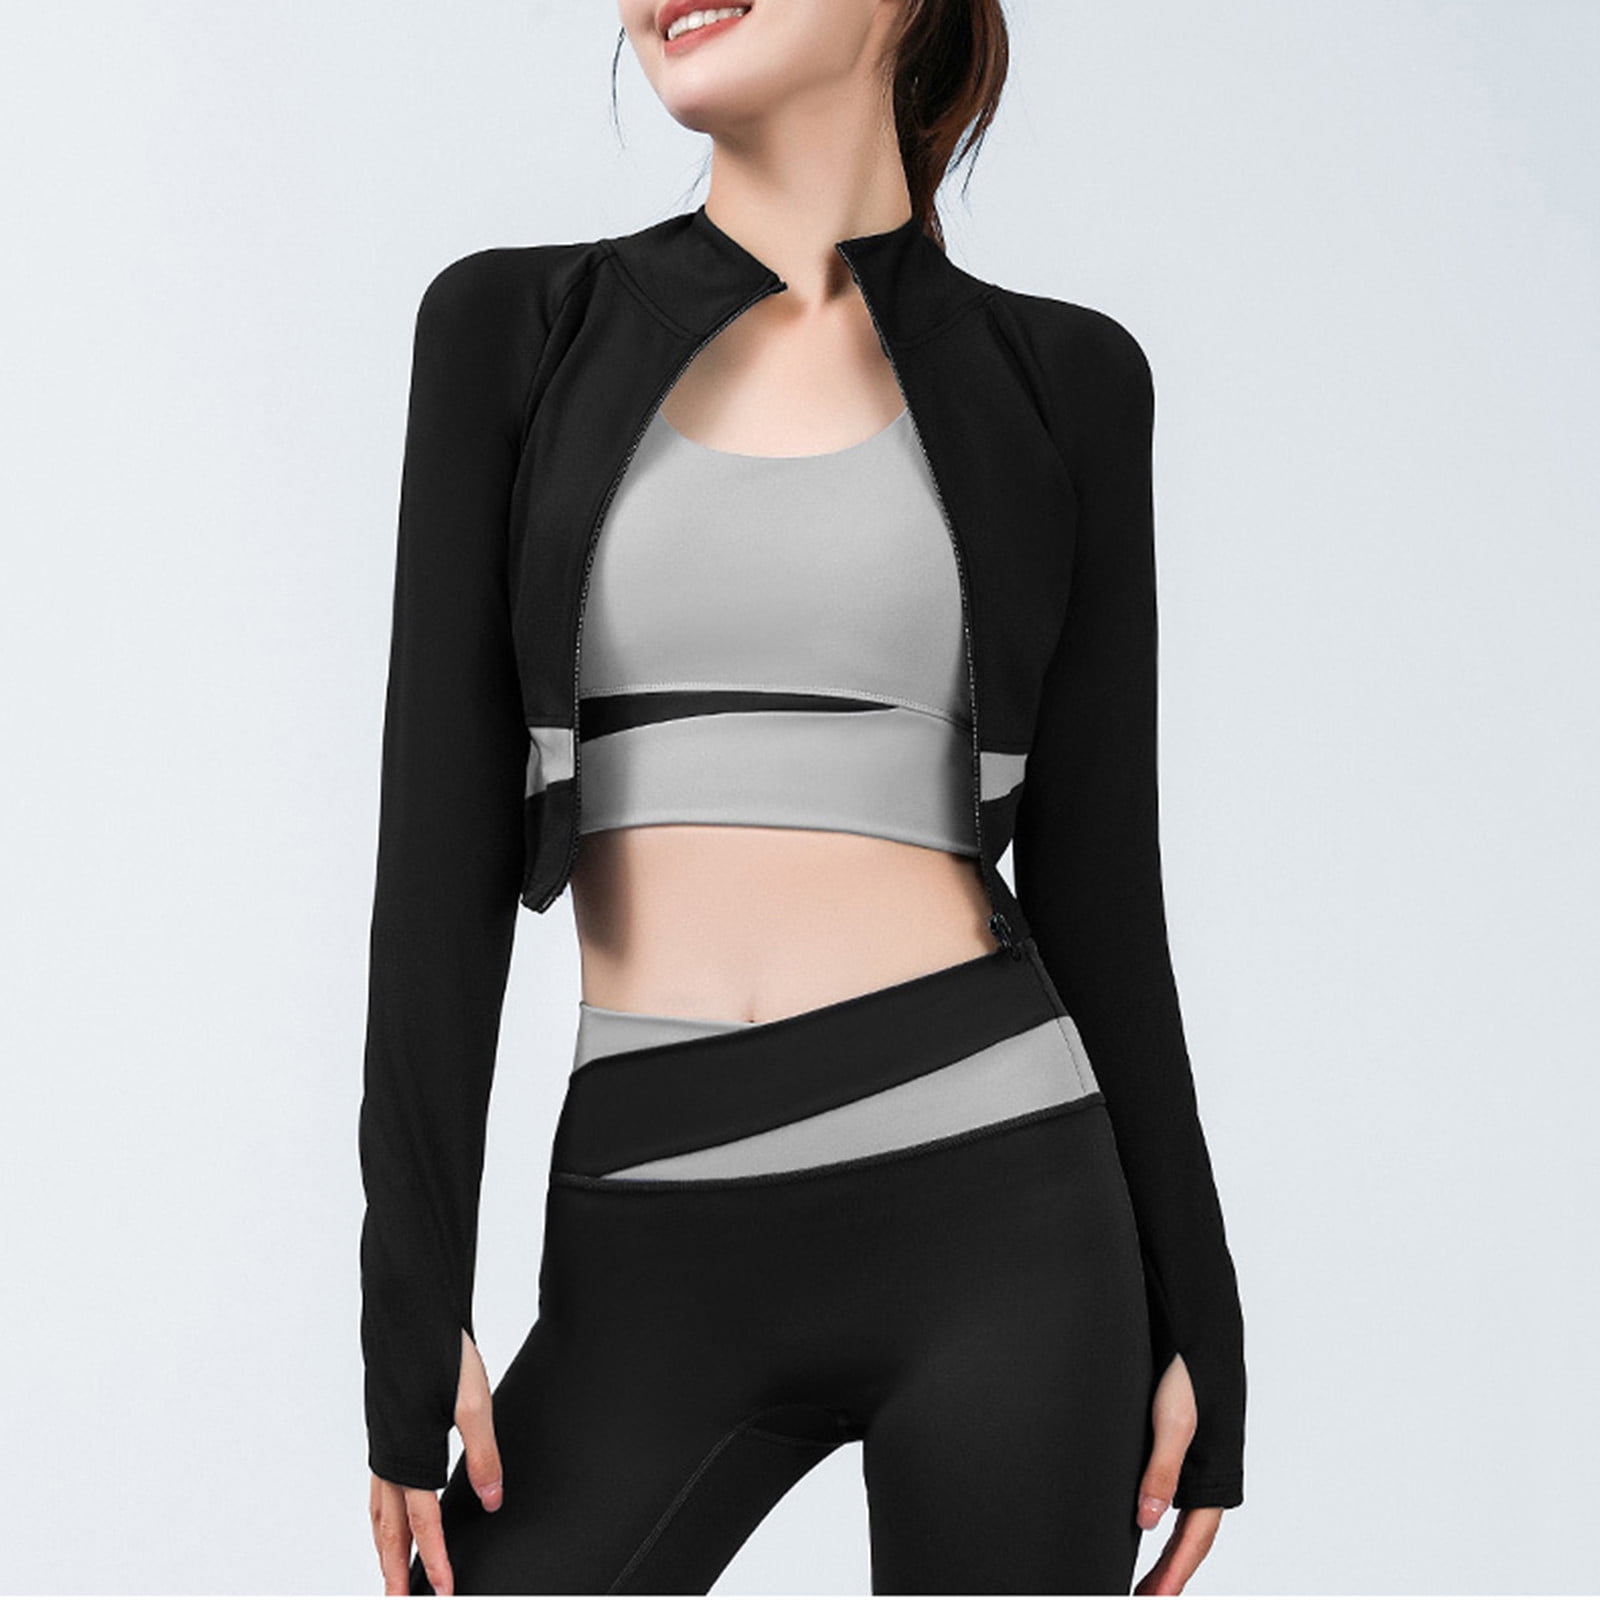 Women's Full Zip Running Hooded Jacket Track Workout Yoga Crop Top  Lightweight Long Sleeve Soft Sweatshirt Cotton Activewear Outerwear Black  Small at  Women's Clothing store